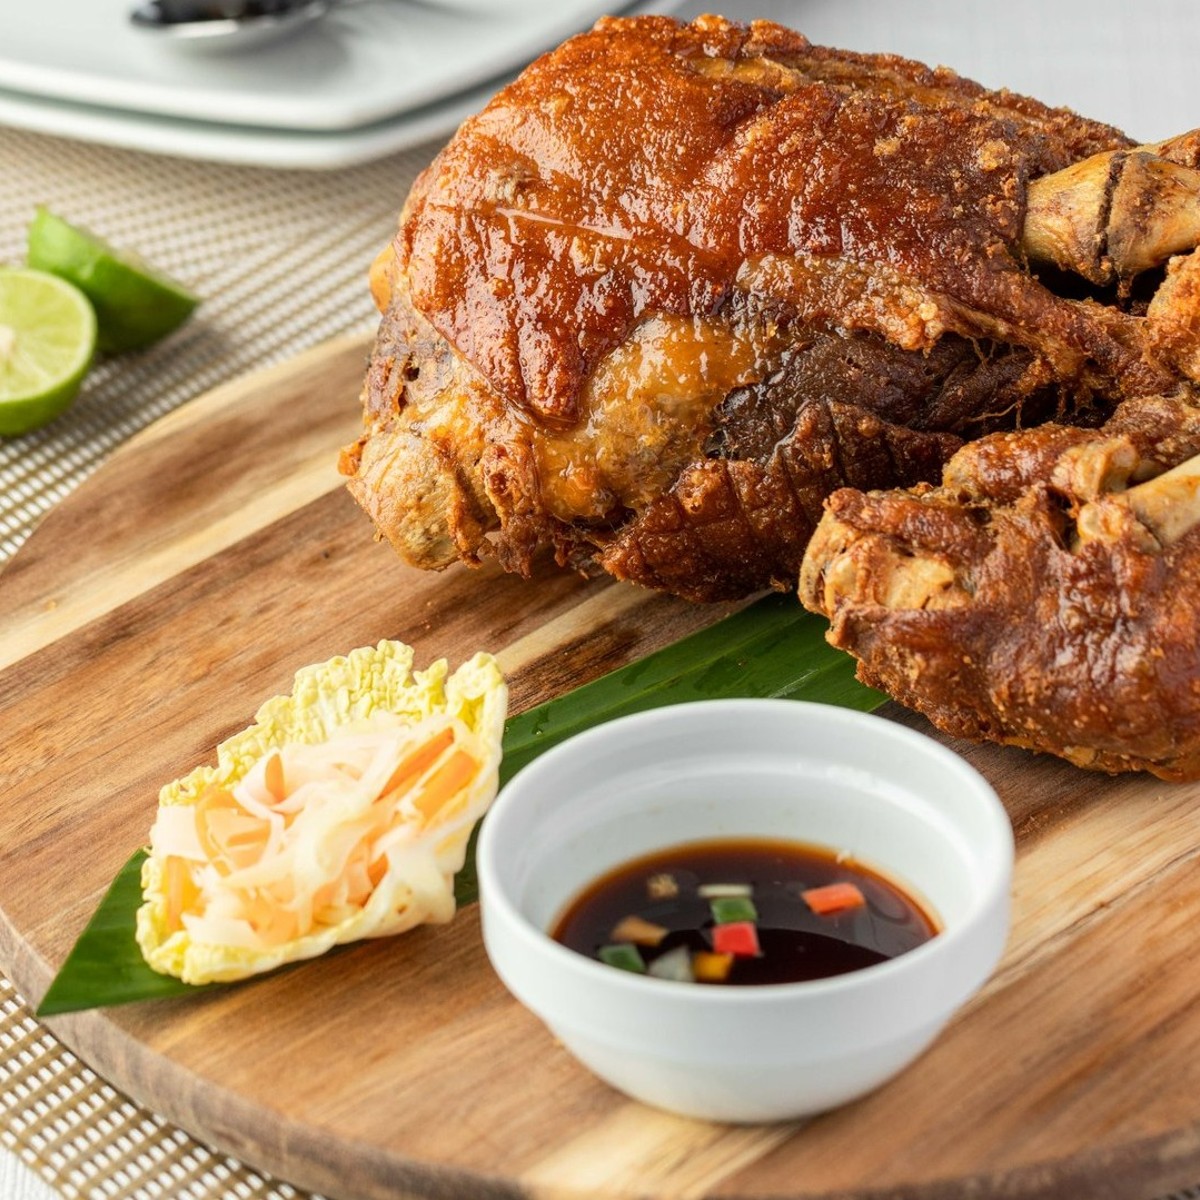 It's Filipino-style fried chicken to the max at Max's of Manila in